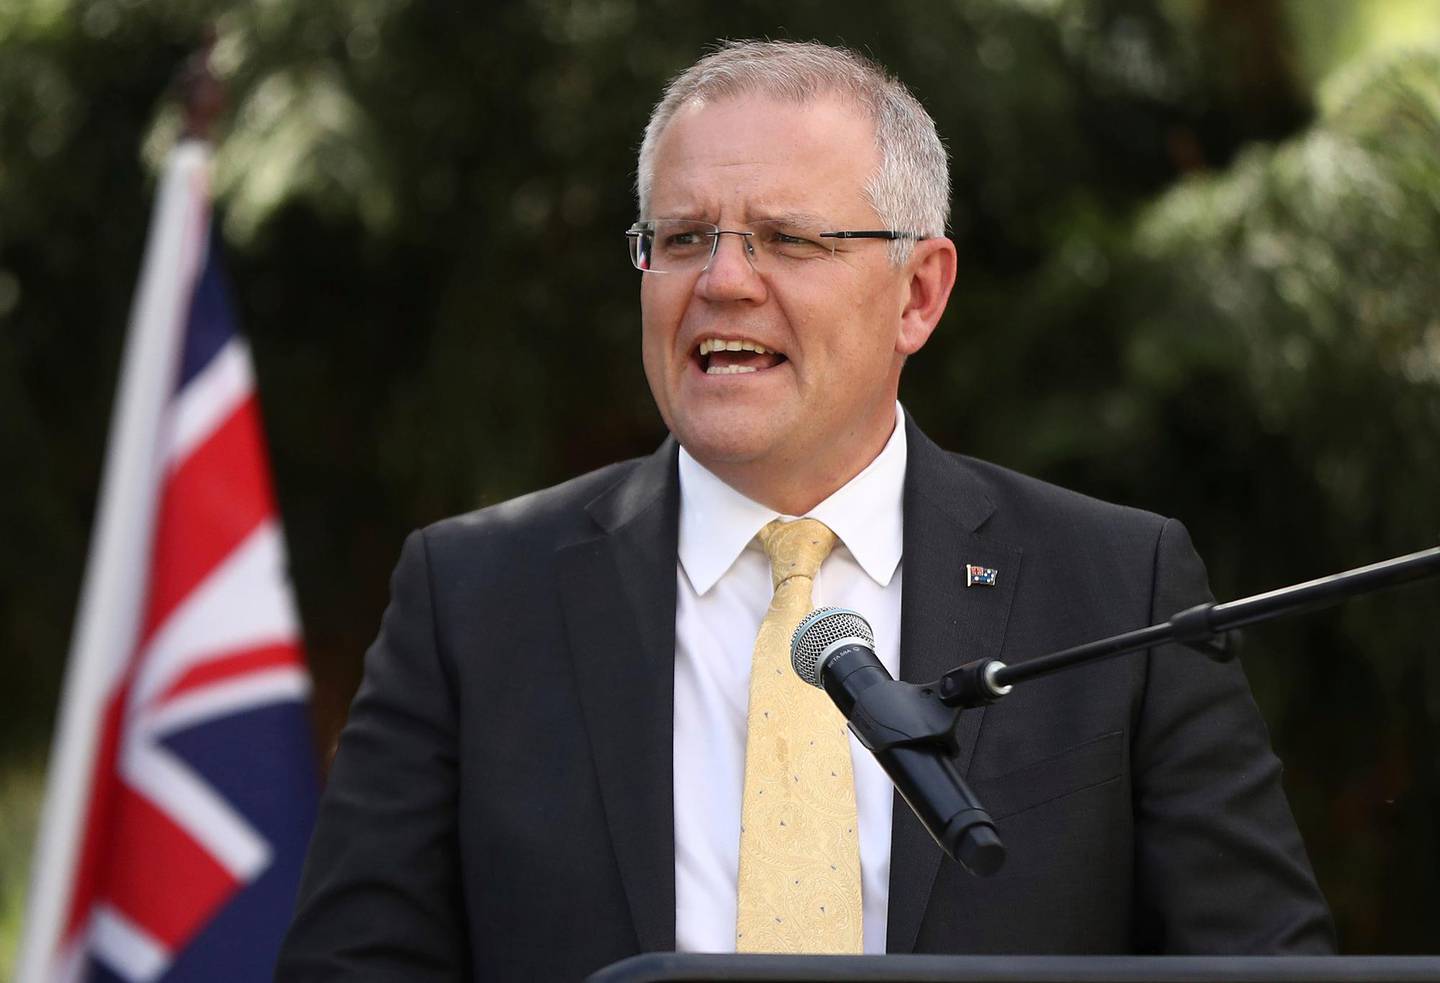 Australian Prime Minister Scott Morrison speaks during the unveiling of a Gandhi statue in the Sydney suburb of Parramatta, Thursday, Nov. 22, 2018. Earlier Morrison revealed plans to increase government powers to strip citizenship from extremists and to control the movements of Australian fighters who return home from the battlefields of Syria and Iraq. (Mark Metcalfe/Pool Photo via AP)